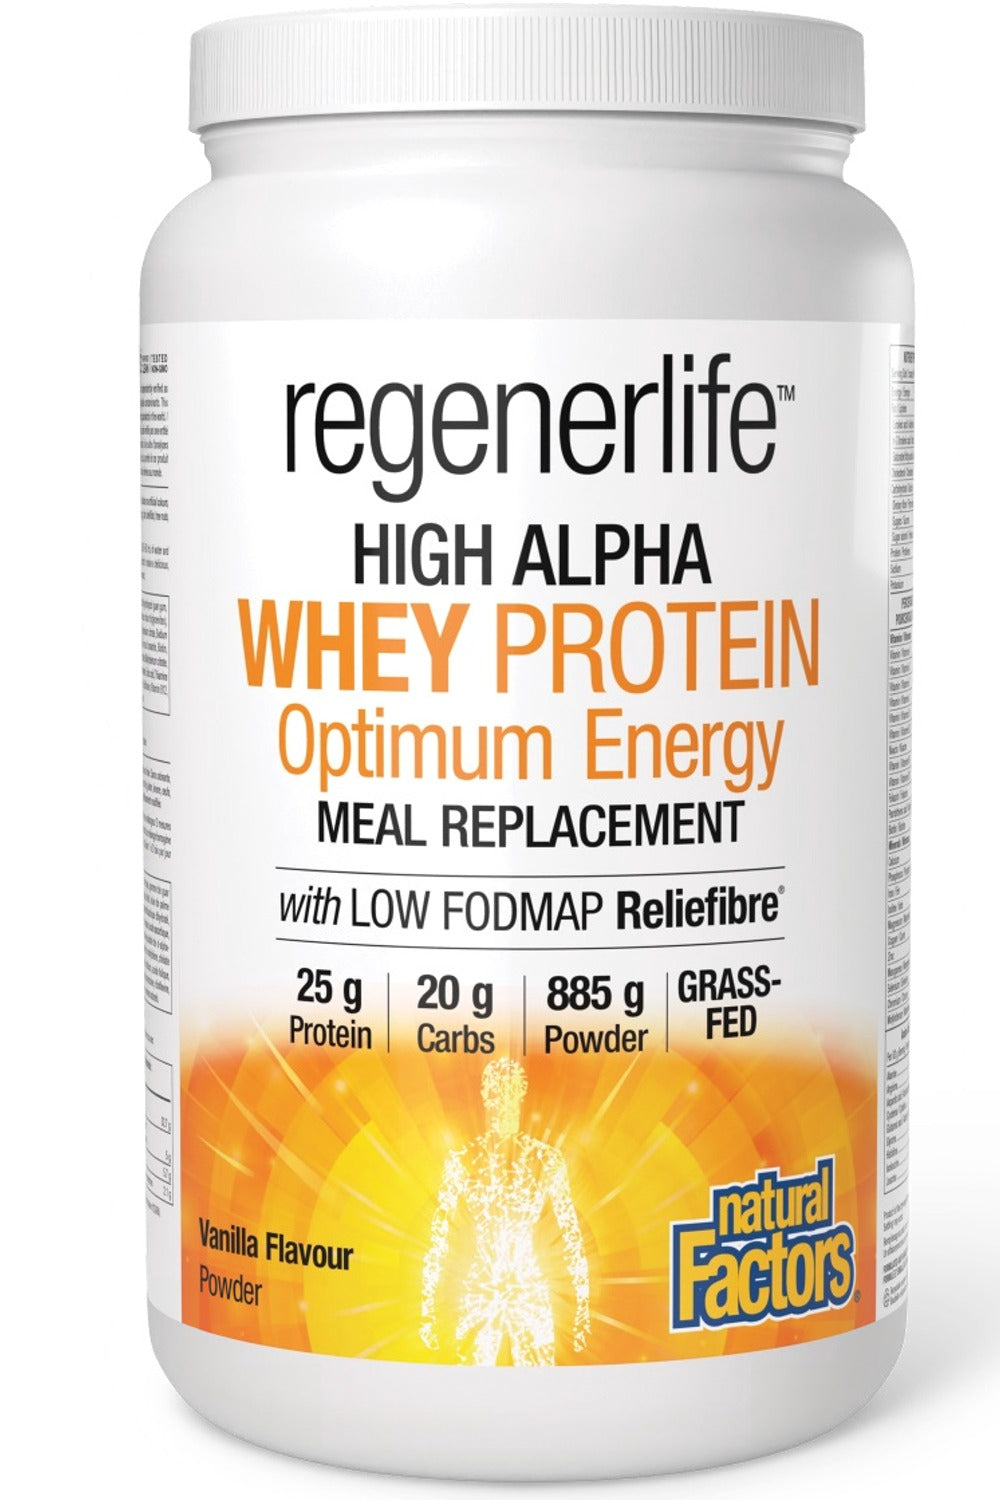 NATURAL FACTORS regenerlife High Alpha Whey Protein Meal Replacement (French Vanilla 885 grams)